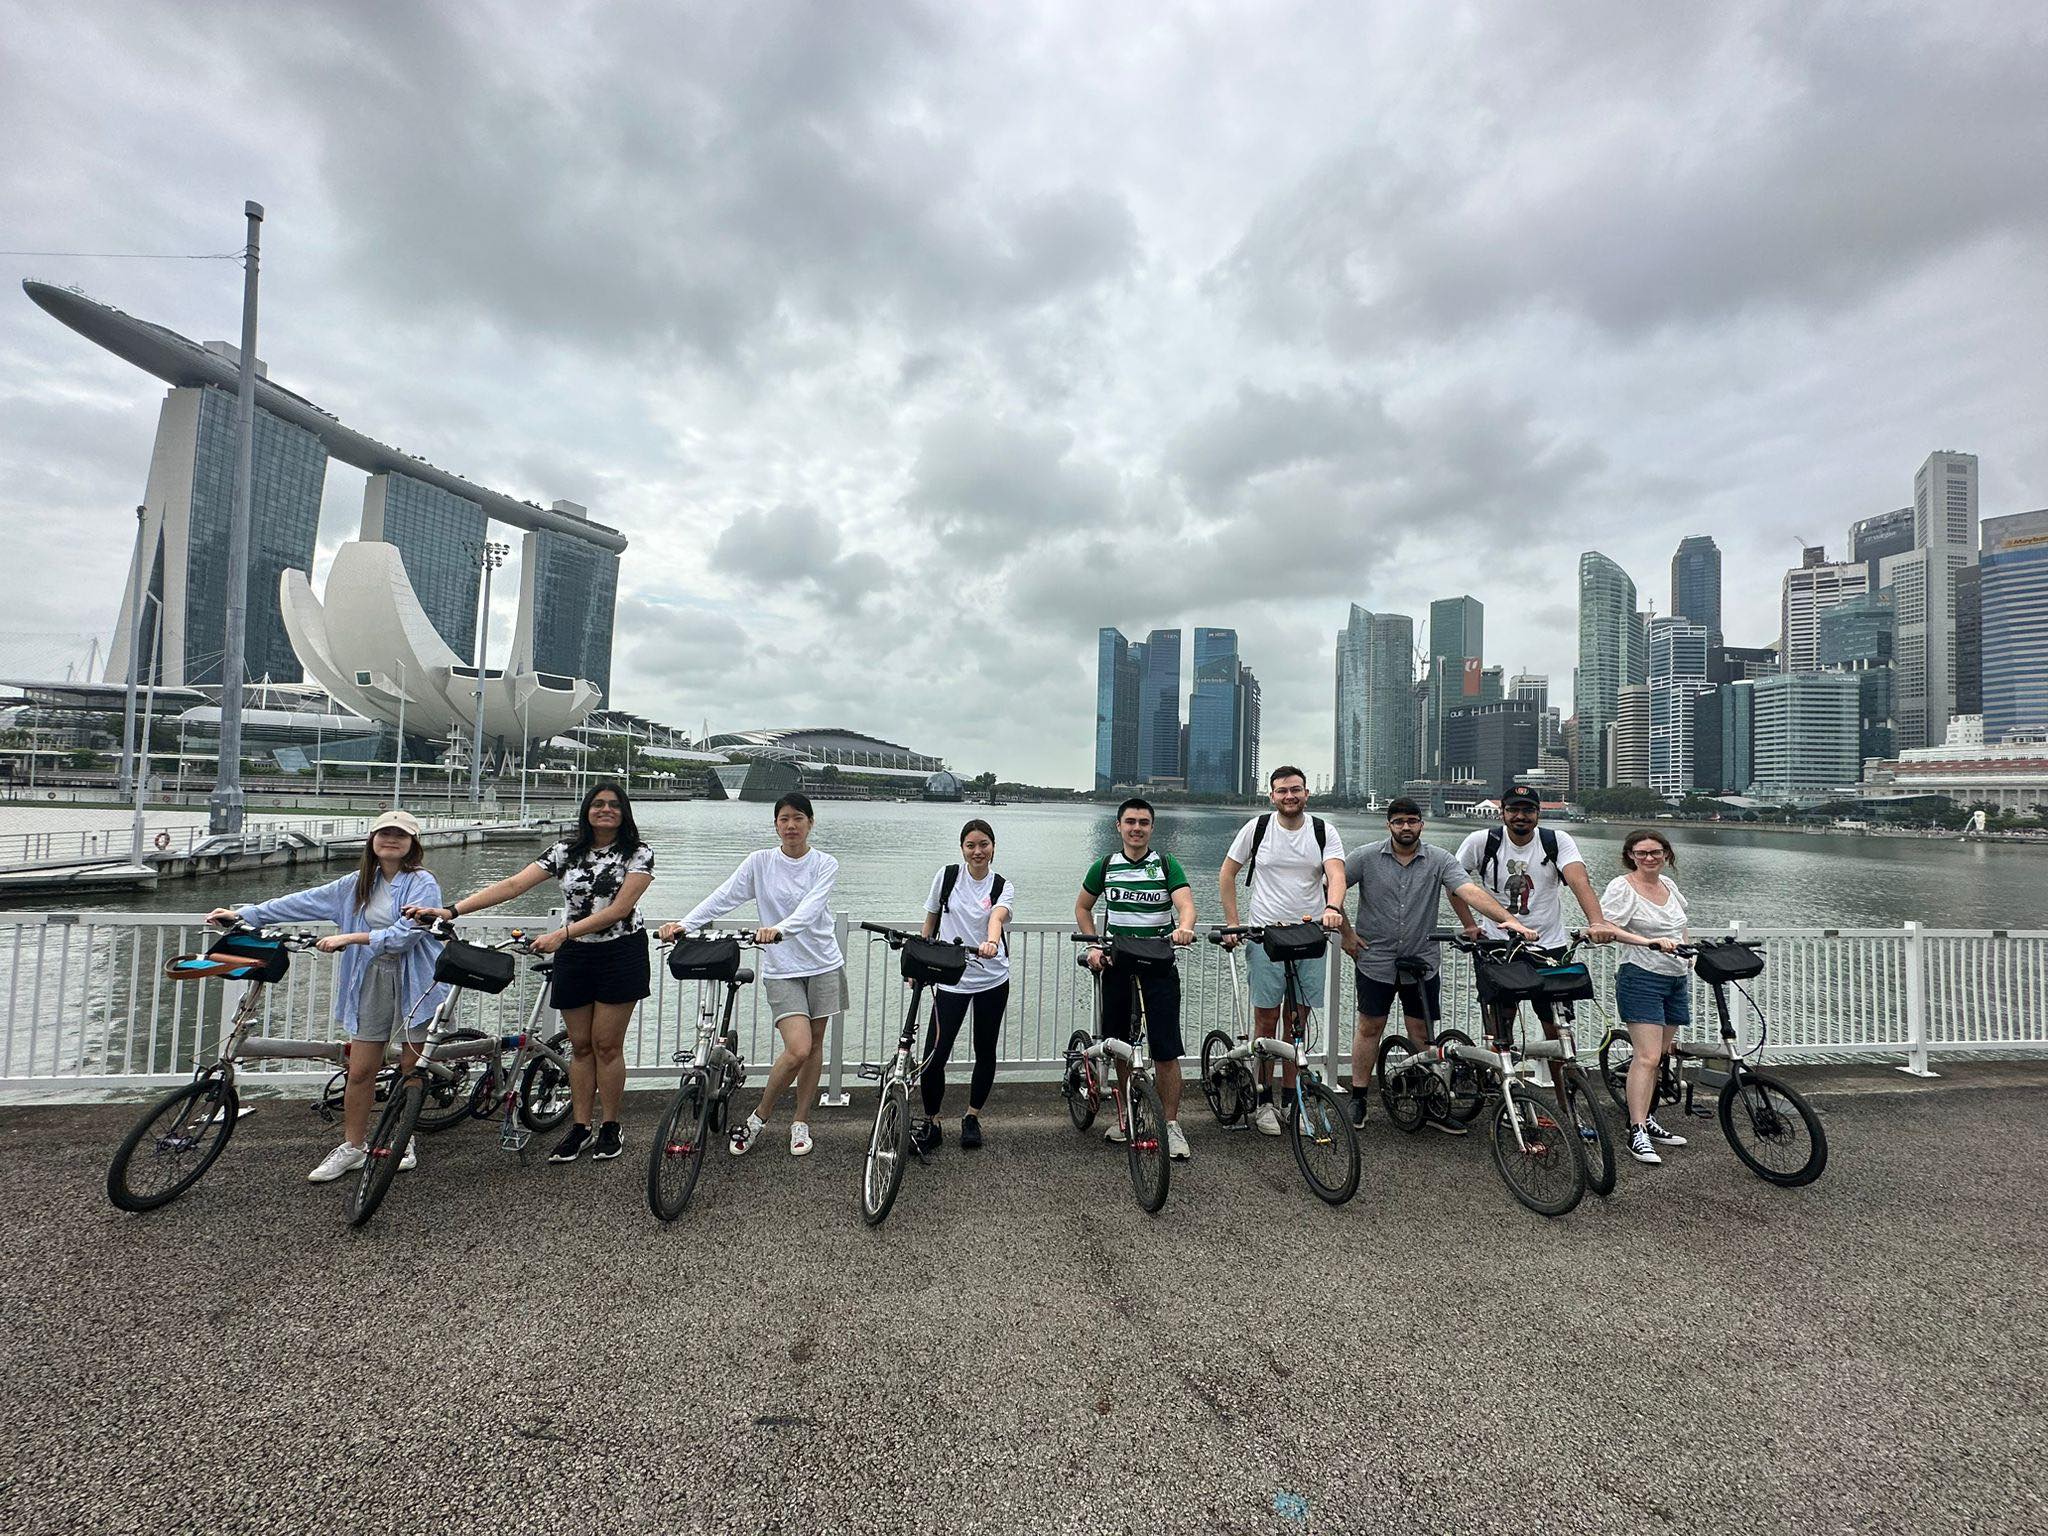 Image of participating ICM students with bikes against the background of downtown Singapore.